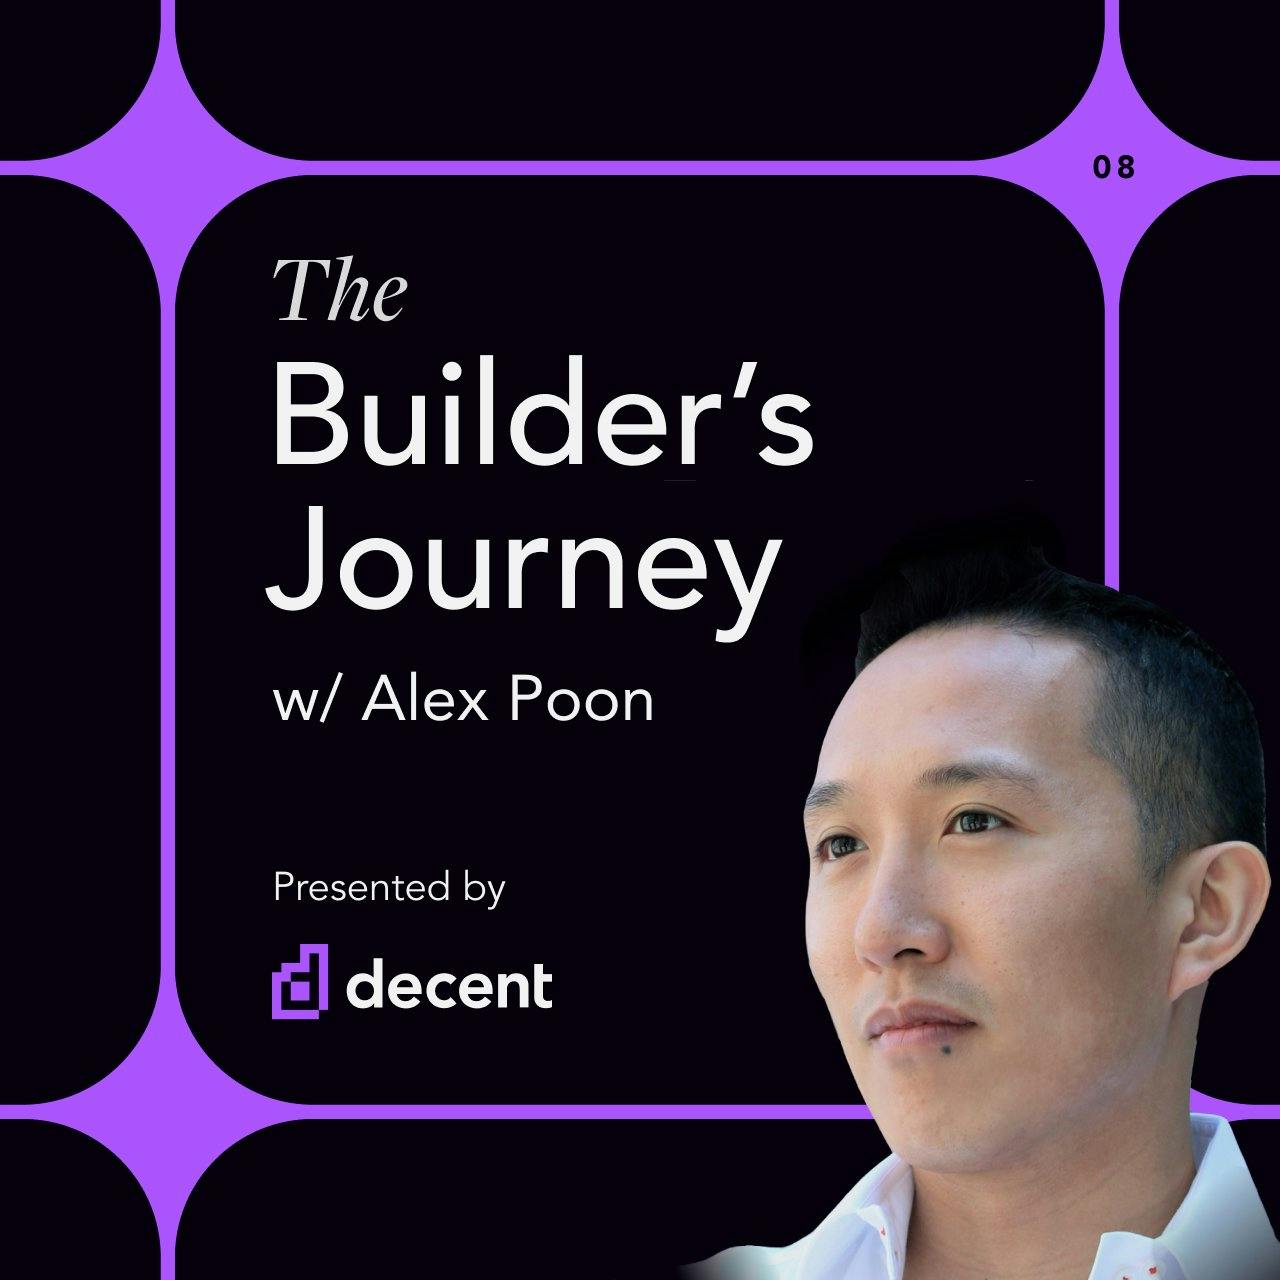 On this episode of the Builder's Journey, we chatted with Alex Poon, co-founder of Charmverse. Charmverse is a Web3 operations platform handling docs, tasks, bounties, proposals, and votes. Alex discusses his journey and learnings from founding several companies, the current state of Web3 and DAO communities, and the power of a quality UX leveraging other web3 protocols and platforms.